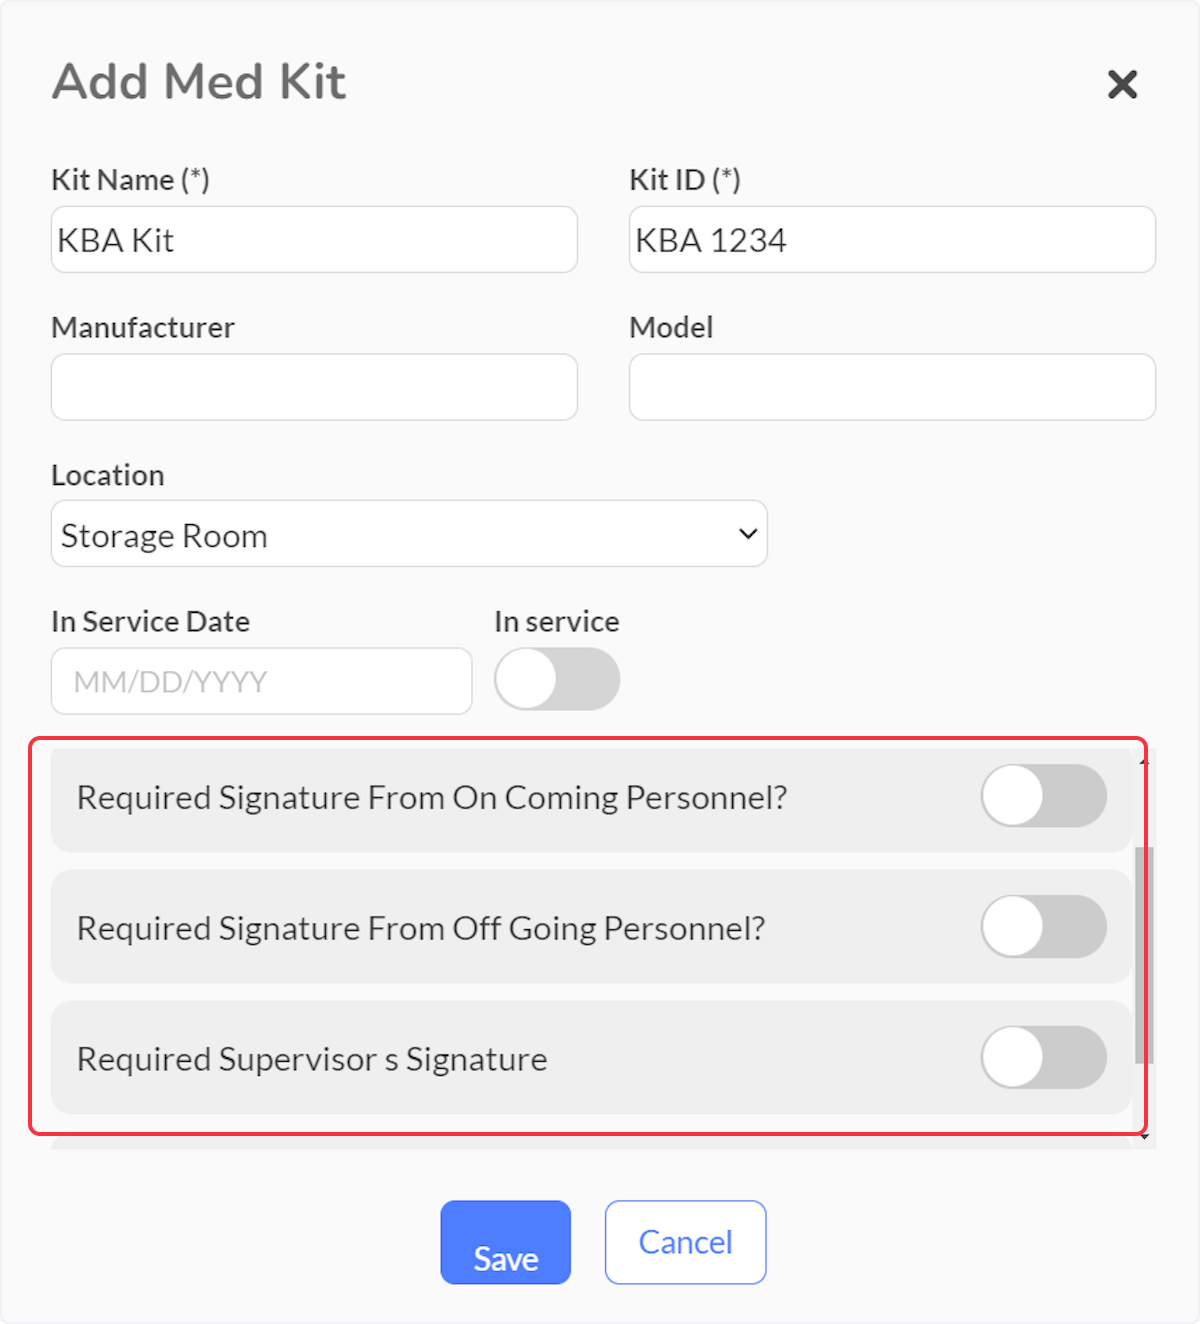 Select if Signatures are going to be required for On Coming, Off Going and a Supervisor.